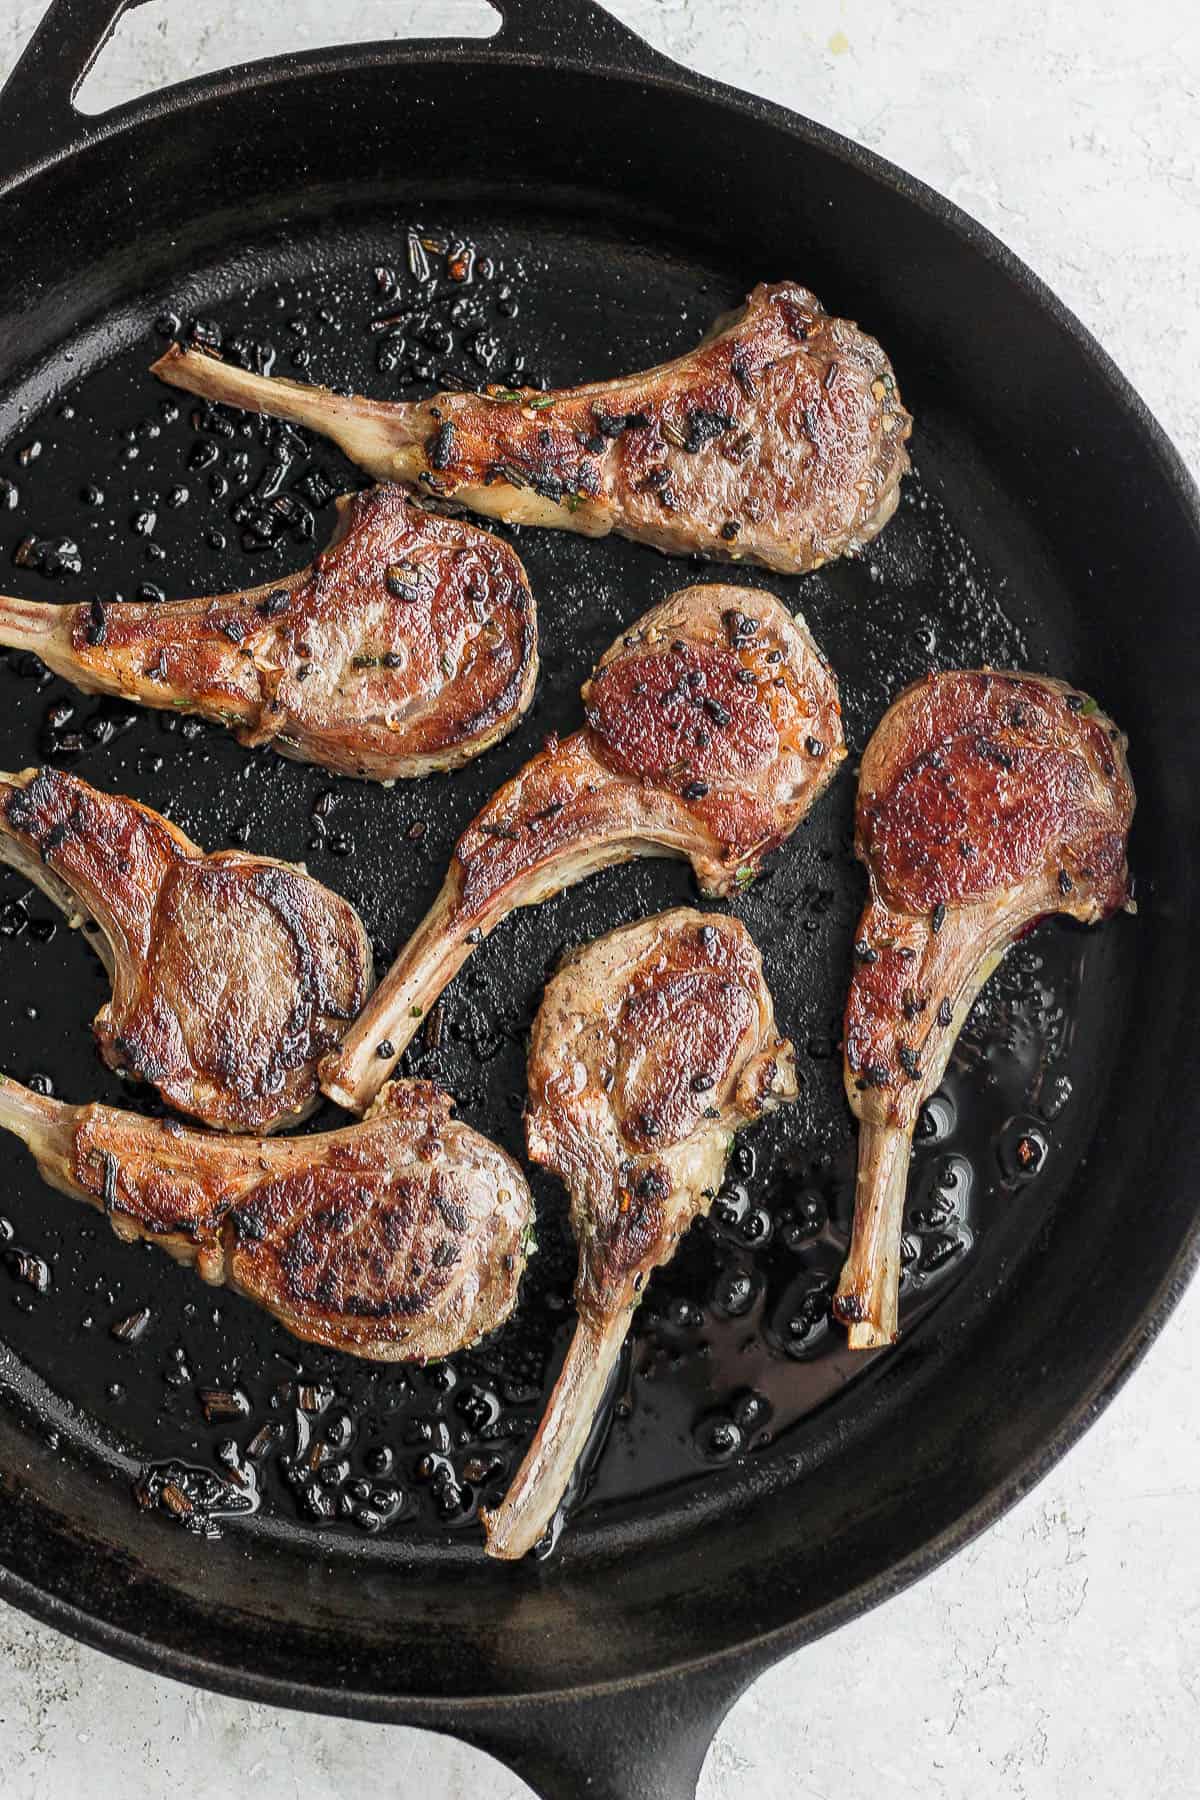 Lamb chops searing in a cast iron skillet.